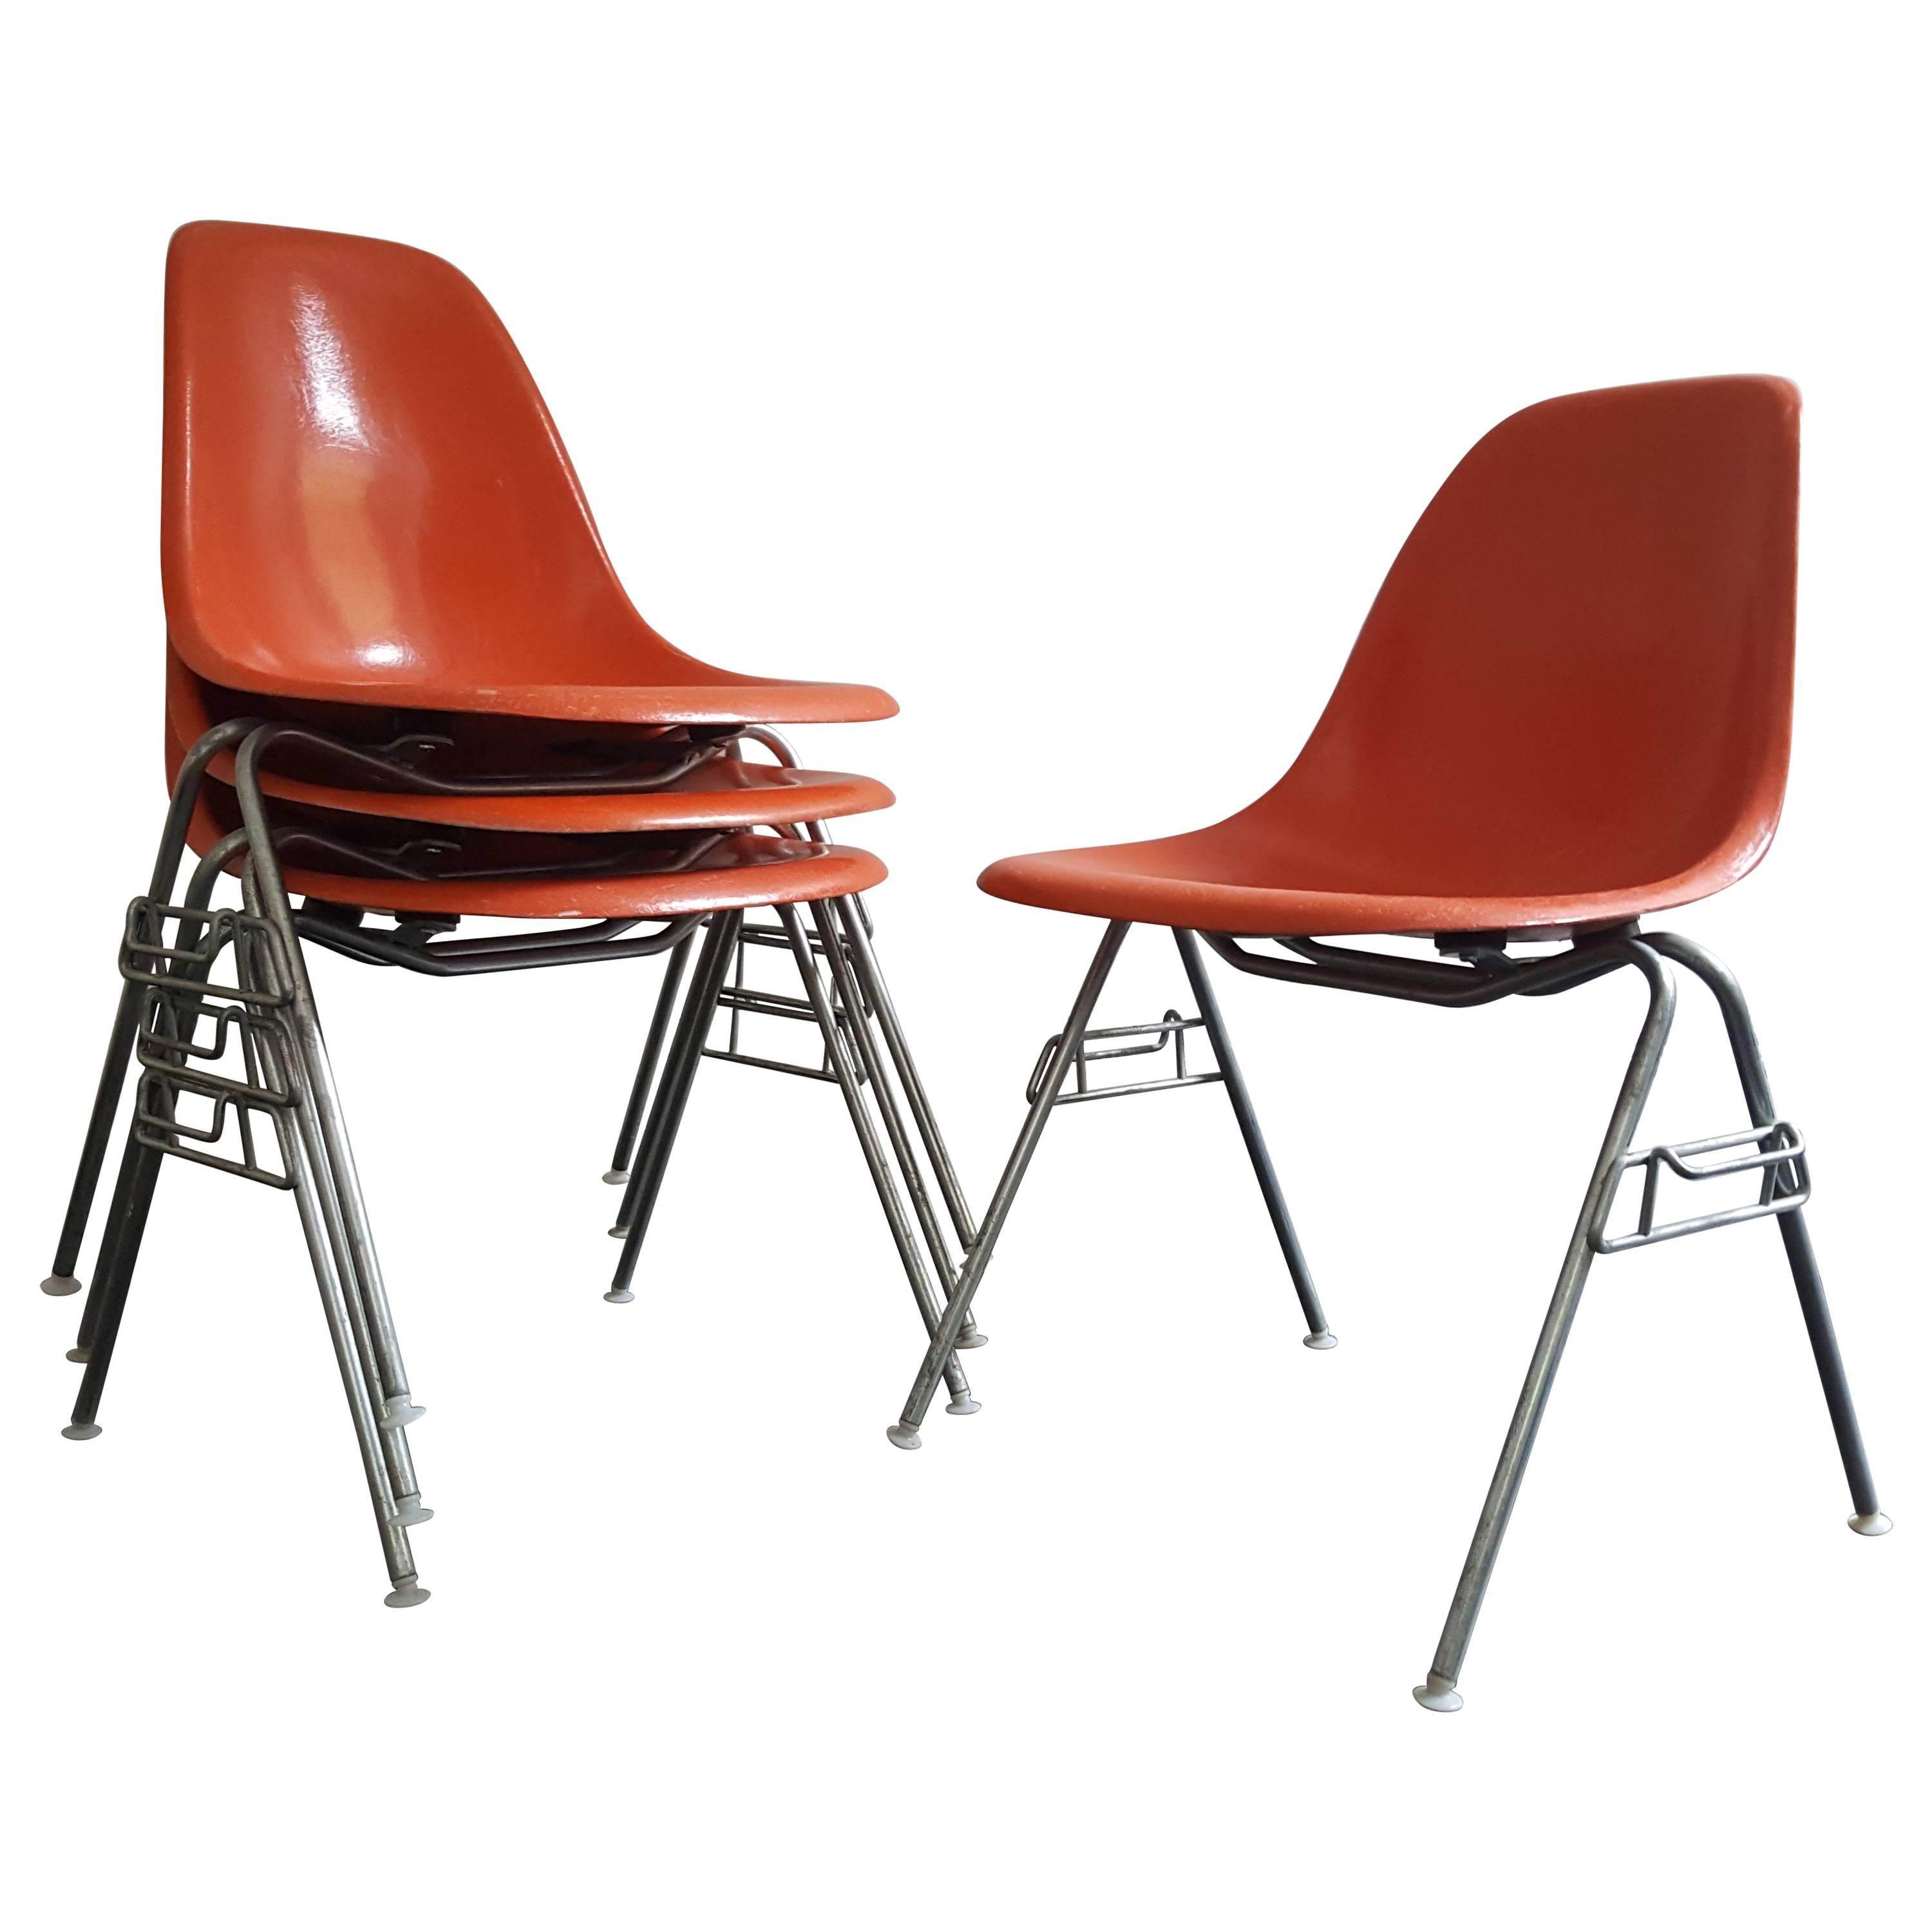 Original Set of Four Charles & Ray Eames DSS Herman Miller Chairs